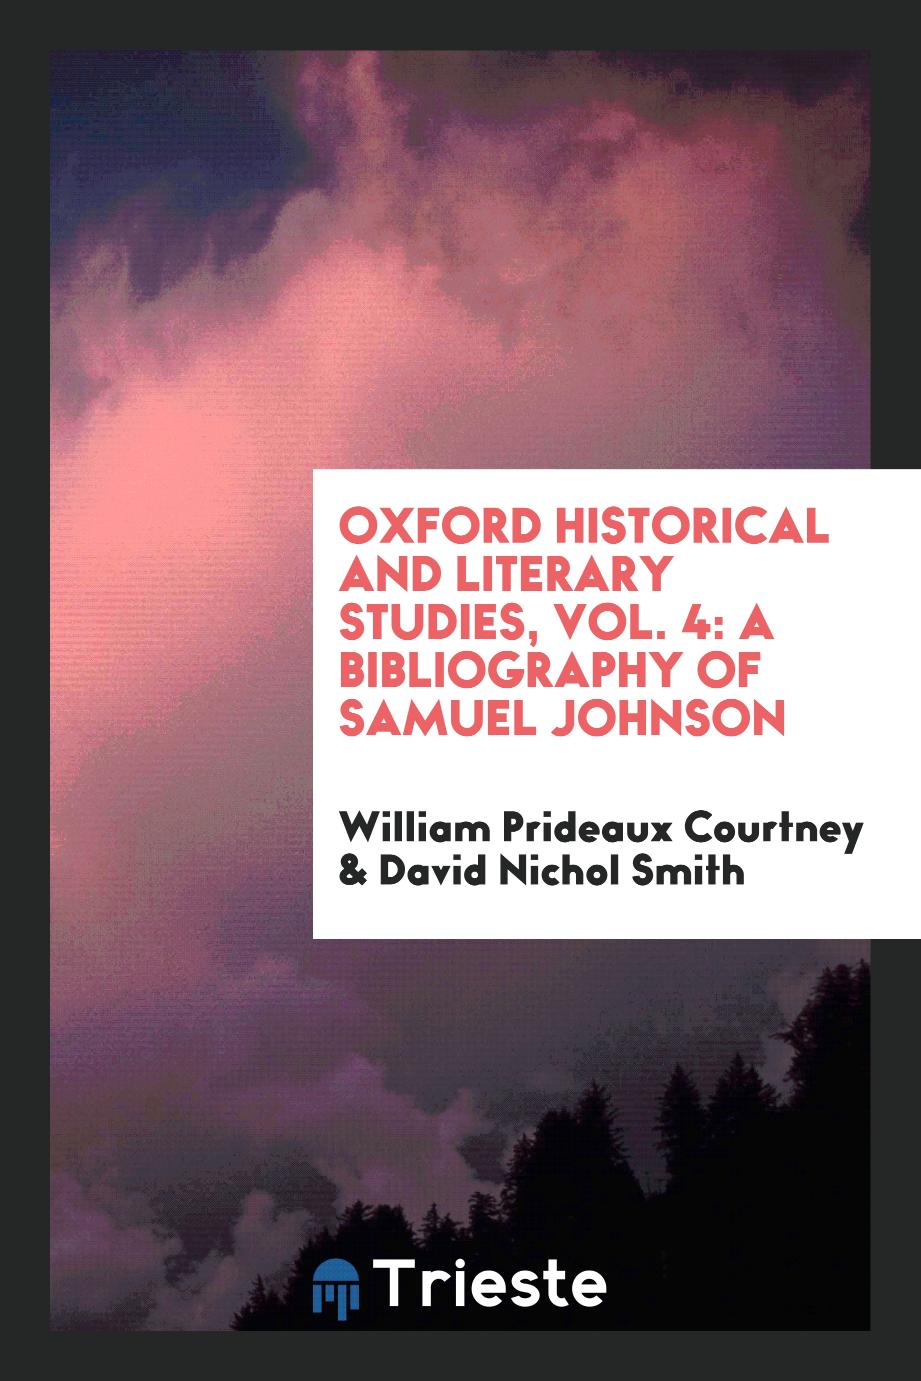 Oxford historical and literary studies, Vol. 4: A bibliography of Samuel Johnson